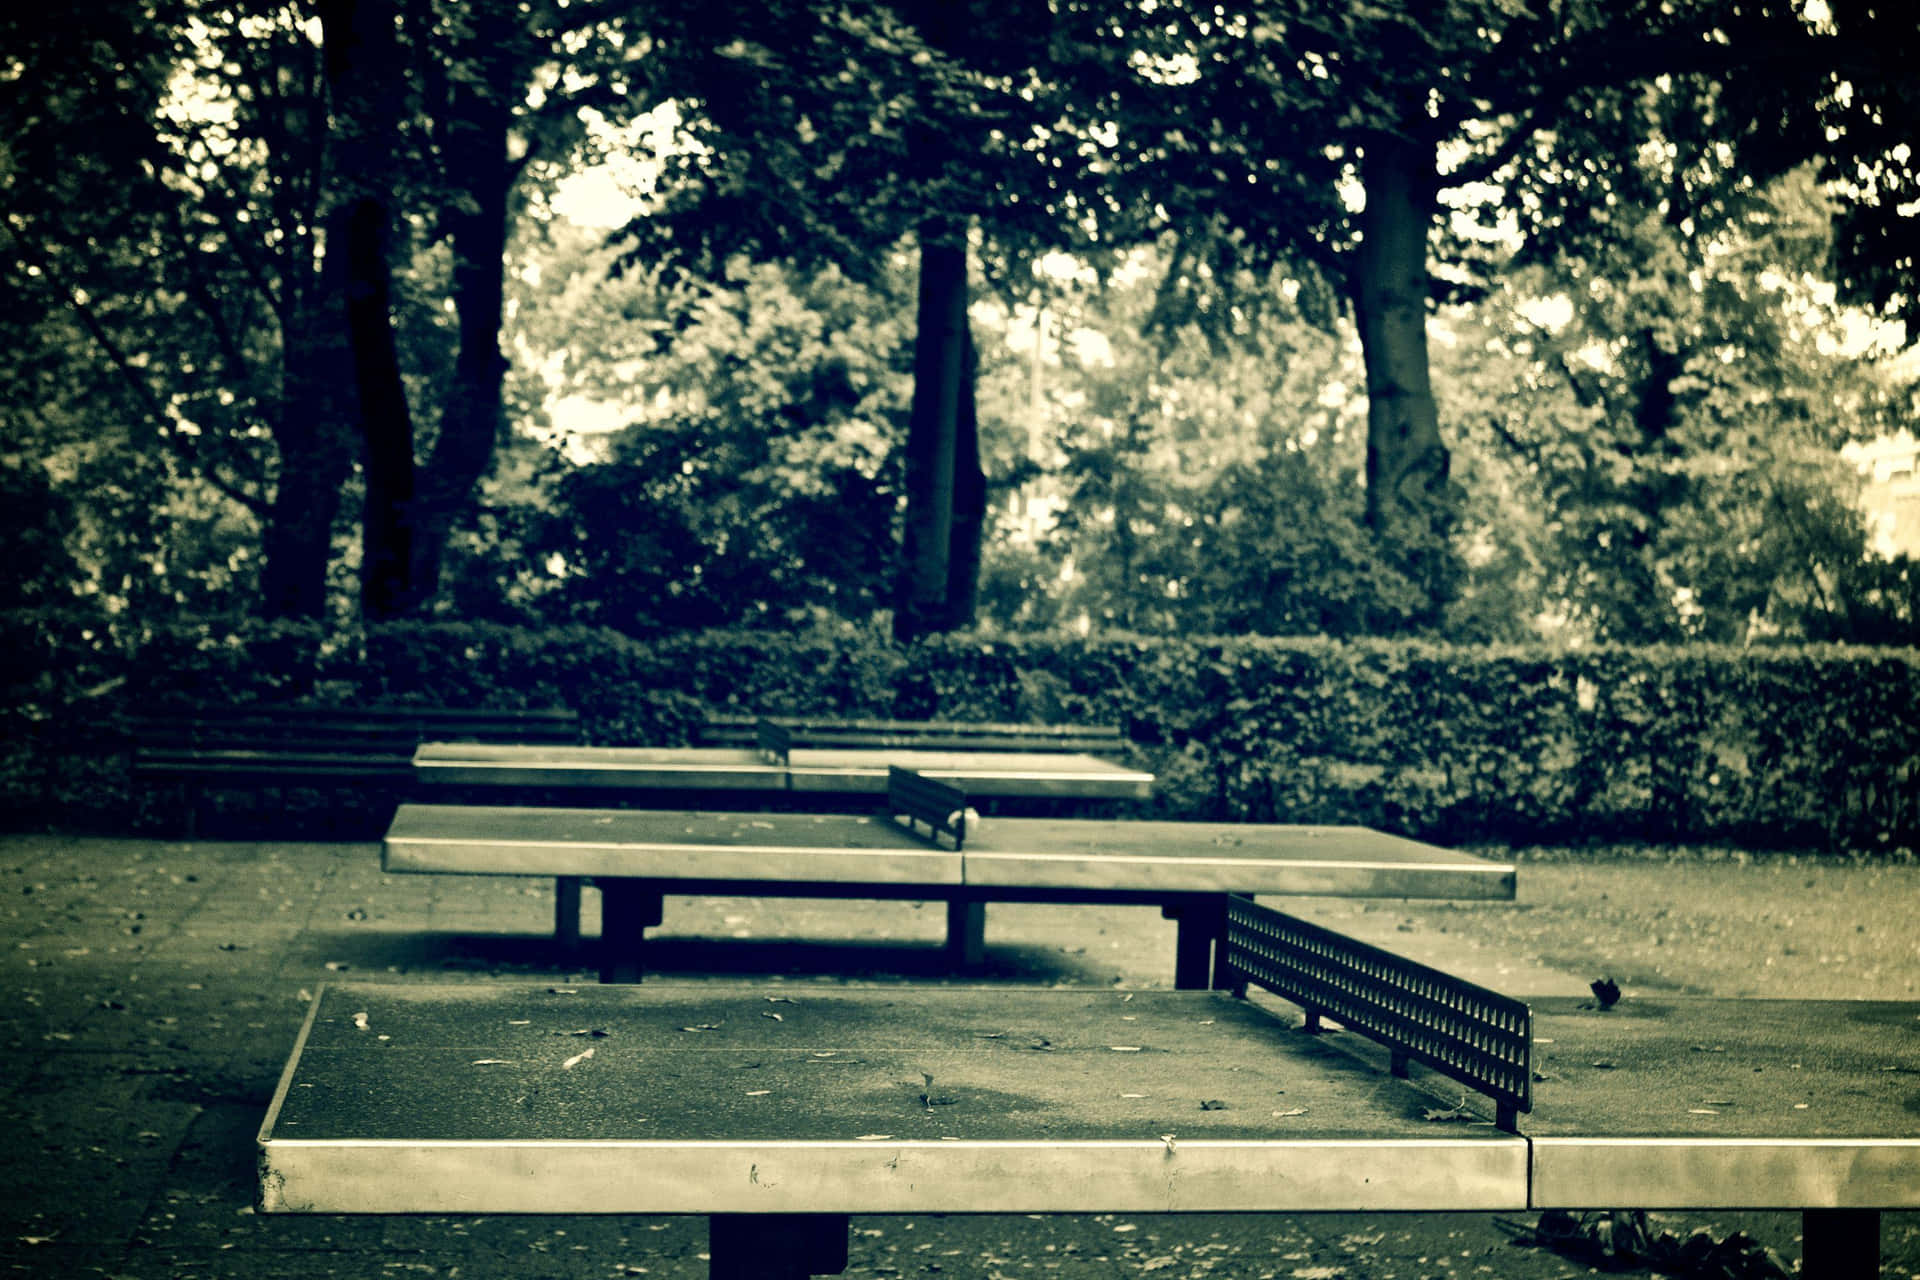 Ping Pong Tables In The Park